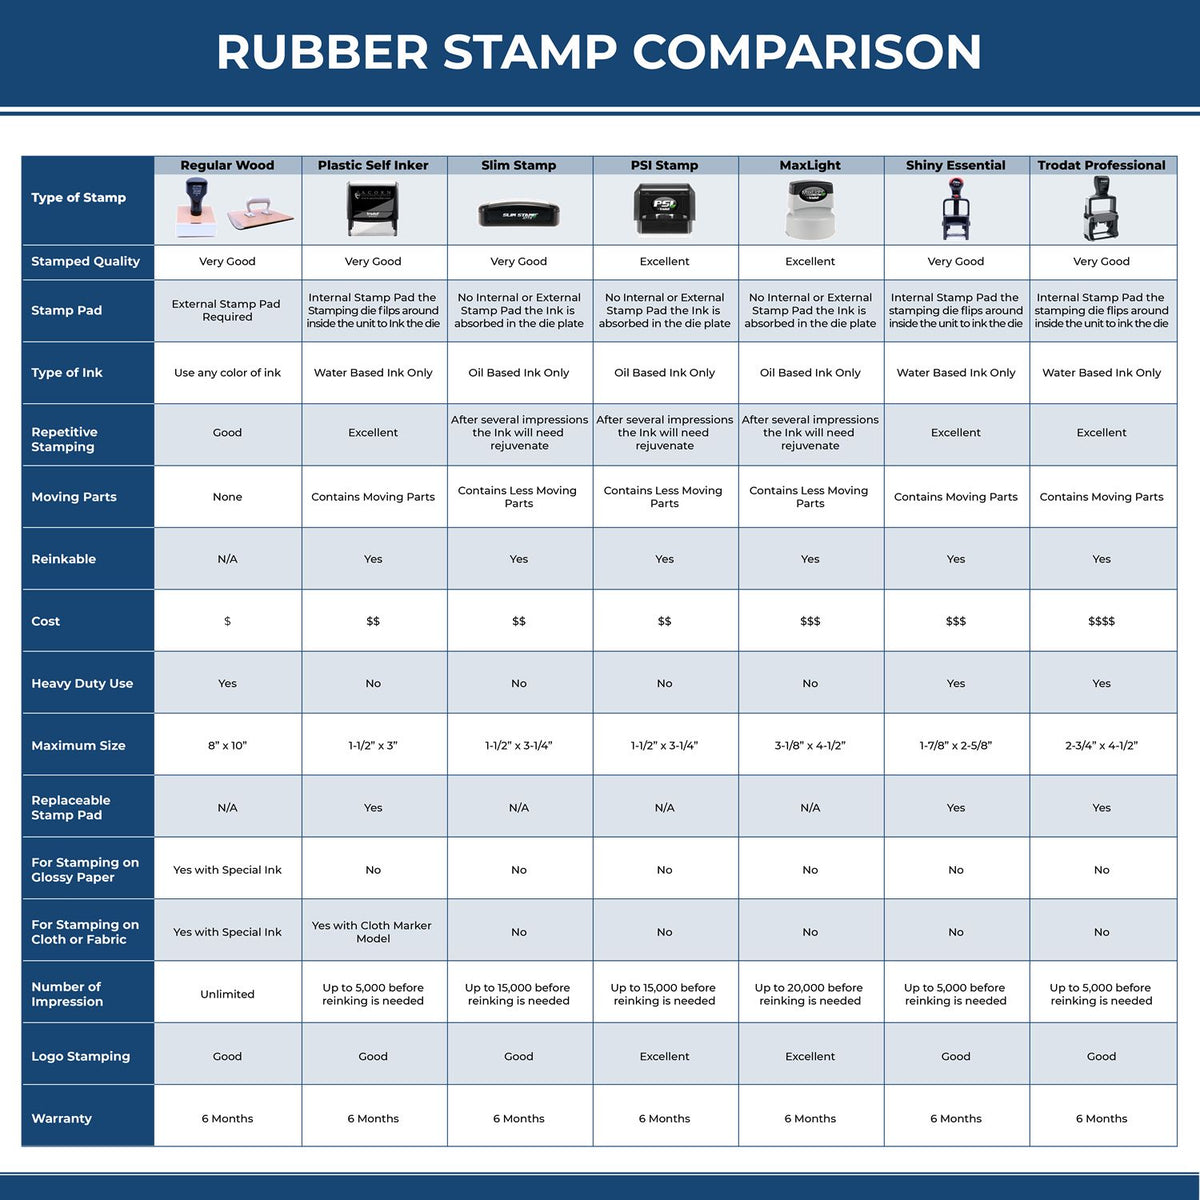 A comparison chart for the different types of mount models available for the Premium MaxLight Pre-Inked Hawaii Engineering Stamp.